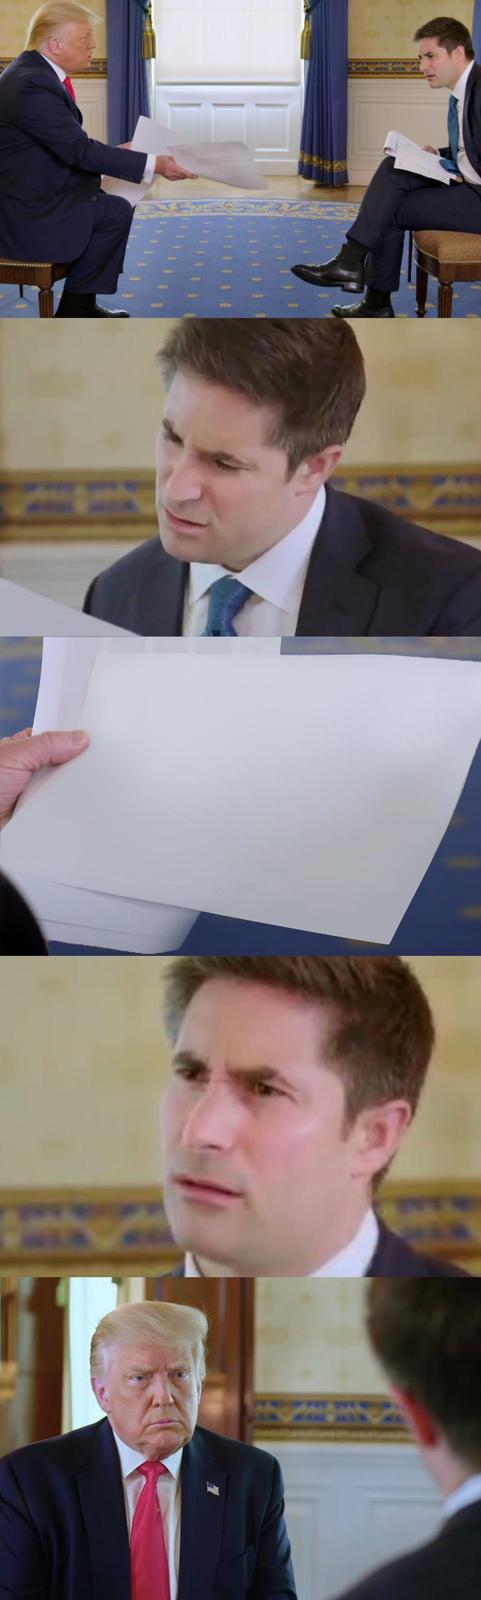 Confused Trump Interview Reporter Blank Meme Template